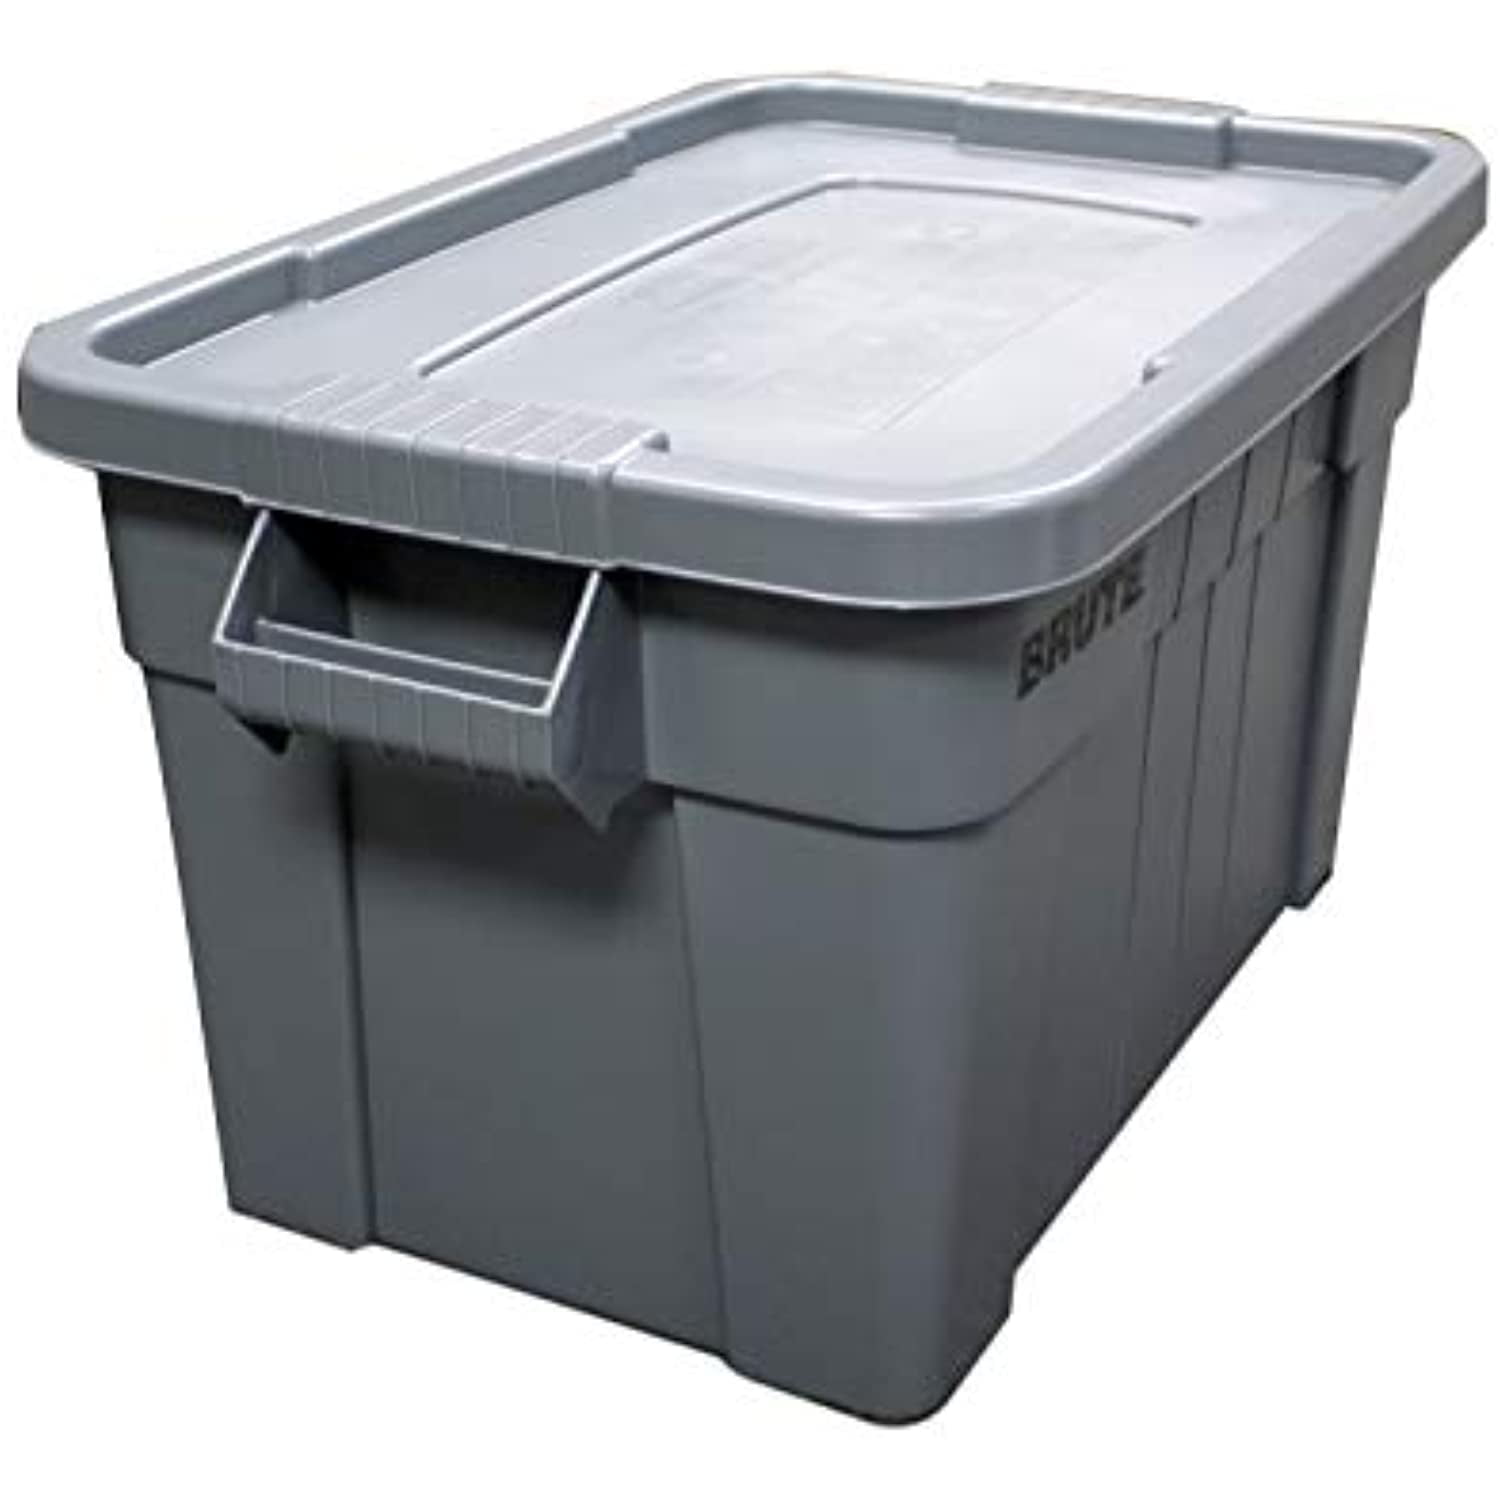 Rubbermaid Commercial Products BRUTE Tote Storage Container with Lid,  20-Gallon, White, 27.75″ x 17.5″ x 15.25″ – Find Organizers That Fit